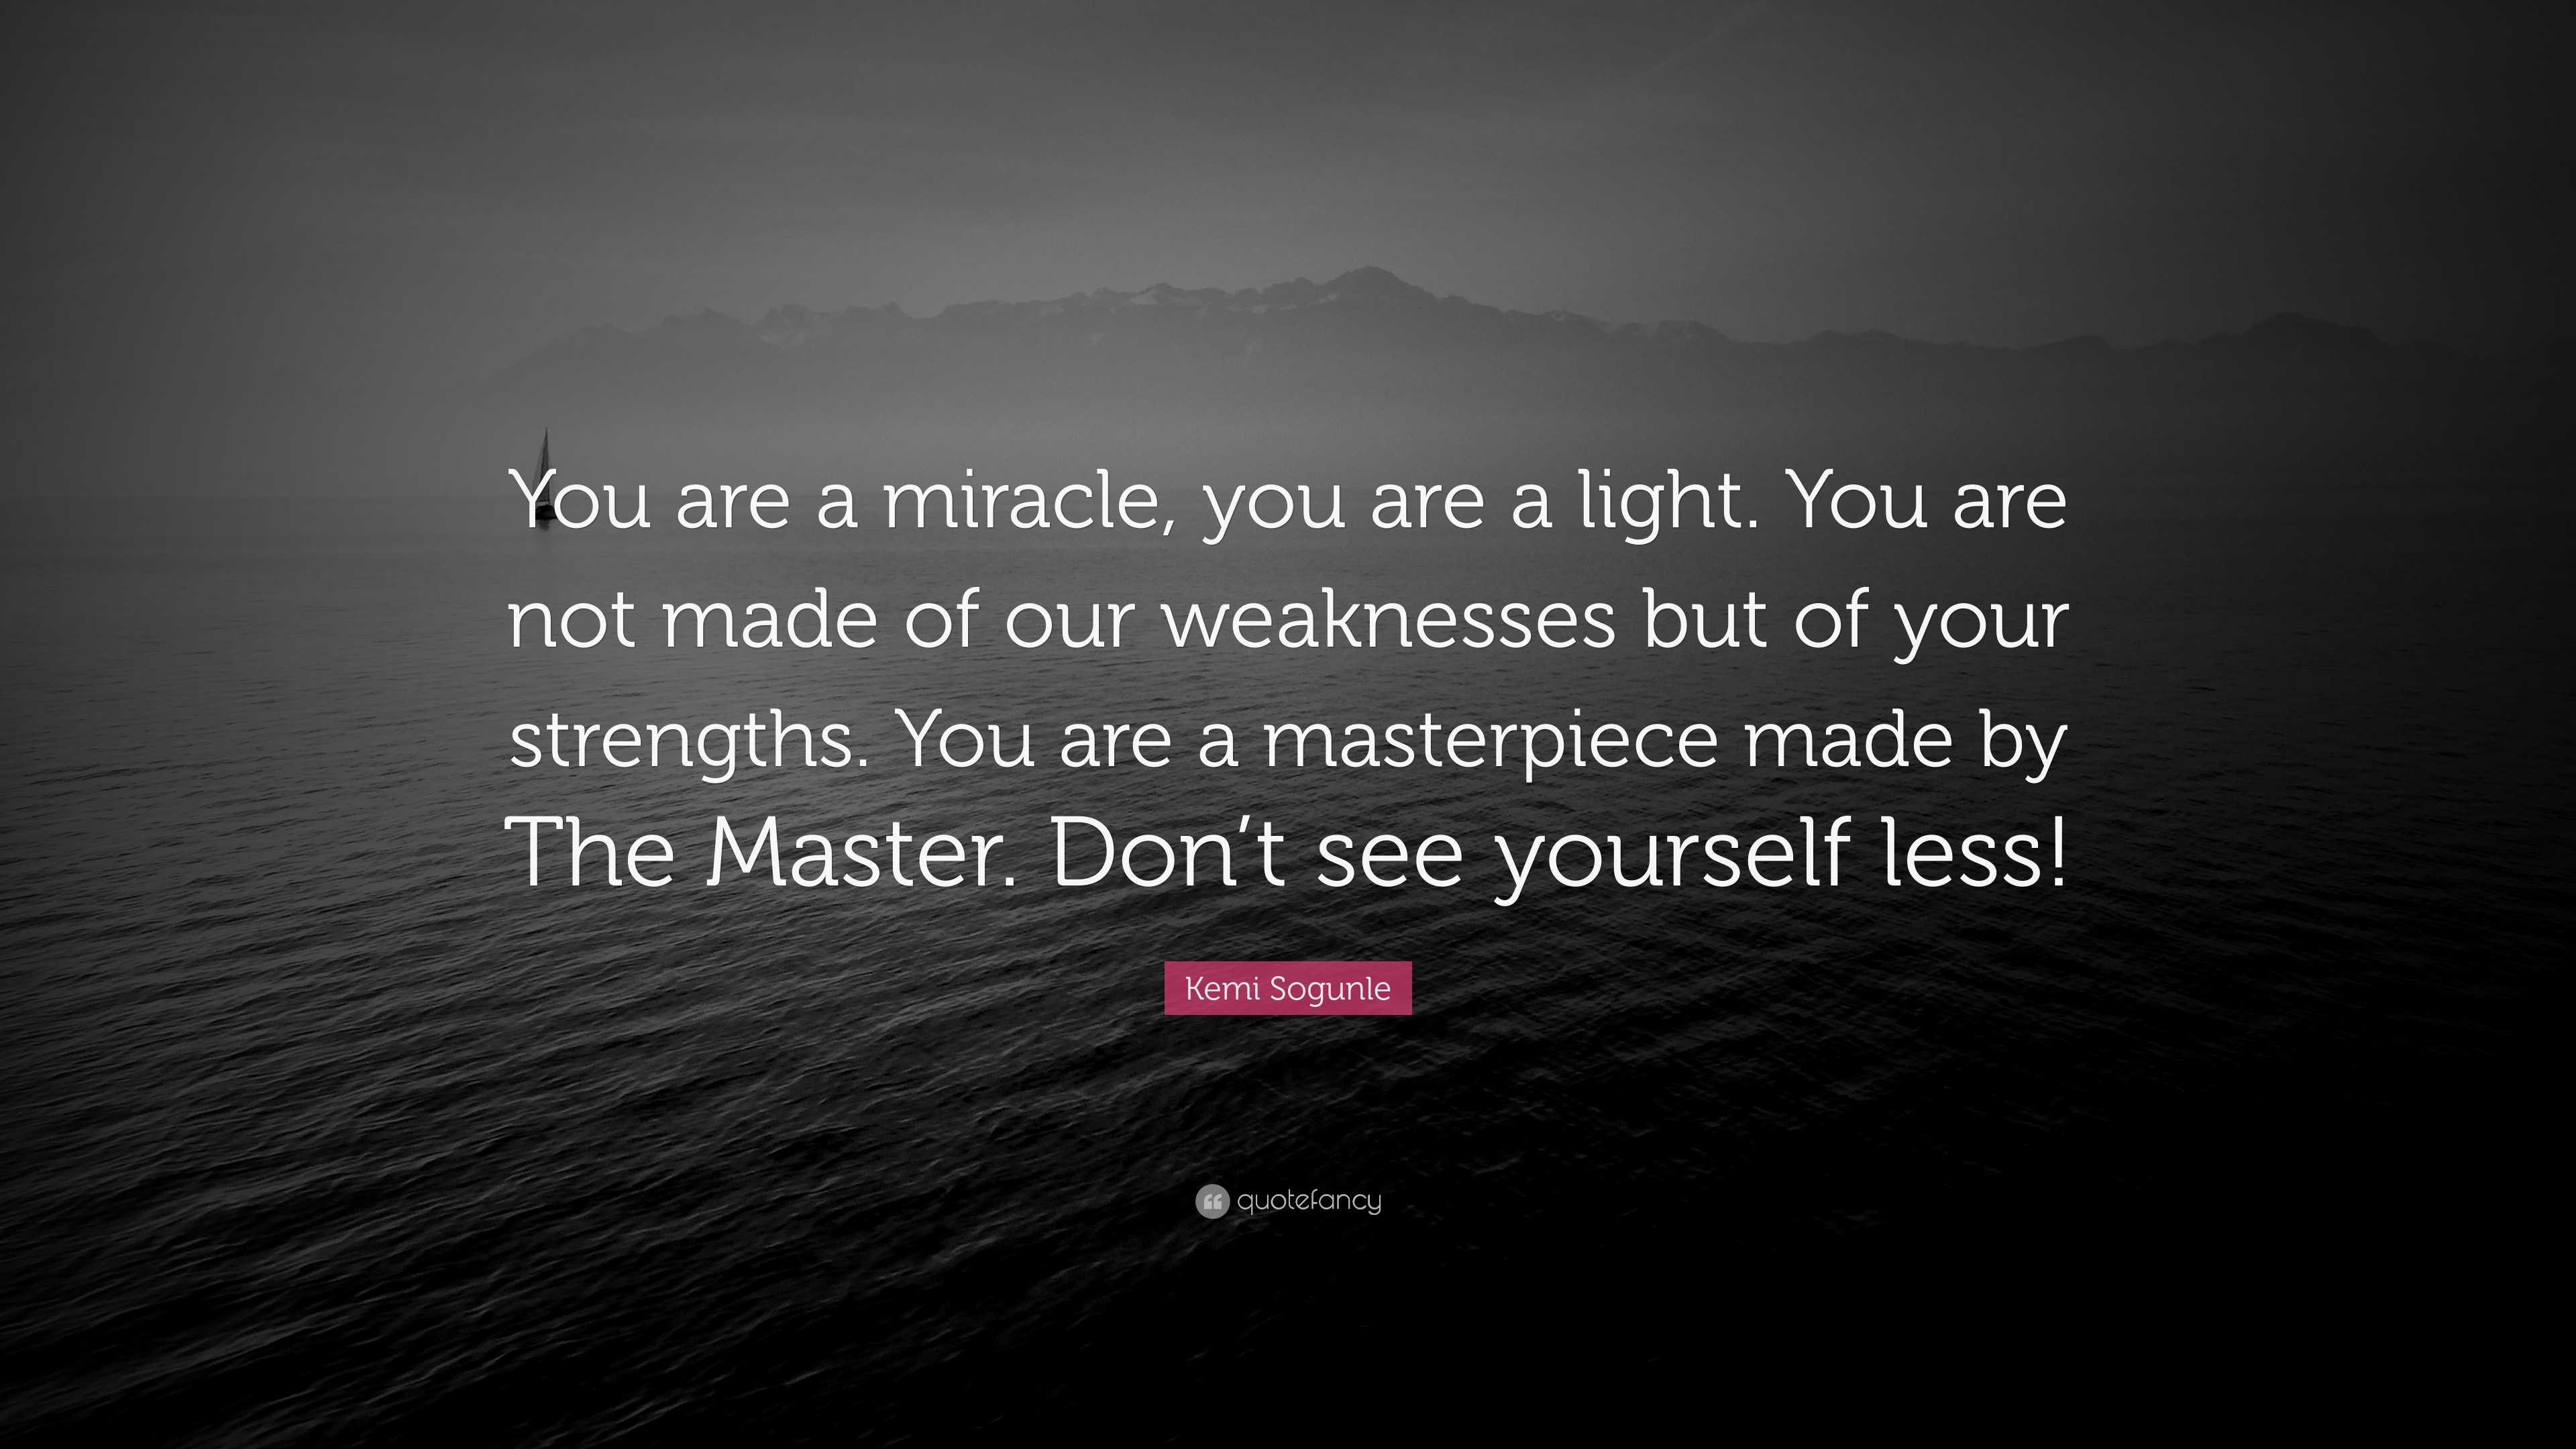 Kemi Sogunle Quote: “You are a miracle, you are a light. You are not made  of our weaknesses but of your strengths. You are a masterpiece made”